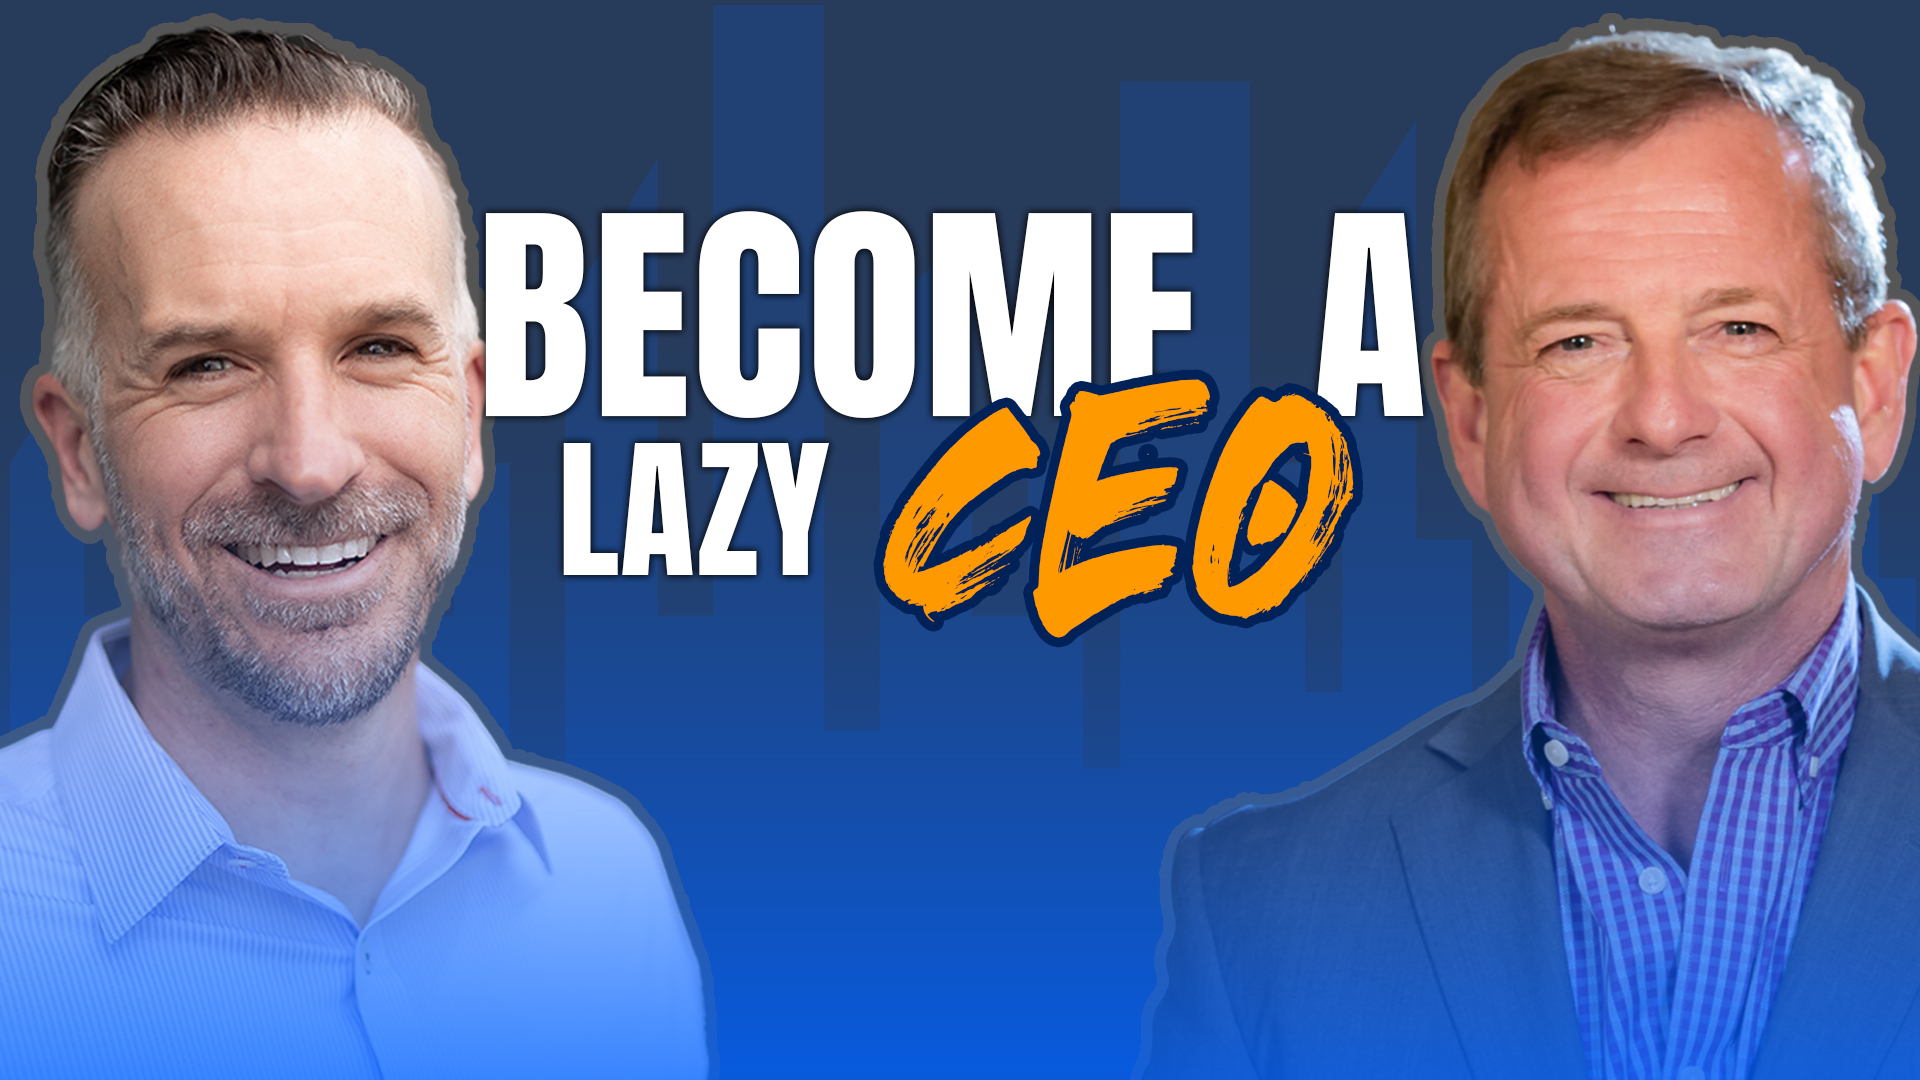 Flow Over Fear: Become A Lazy CEO